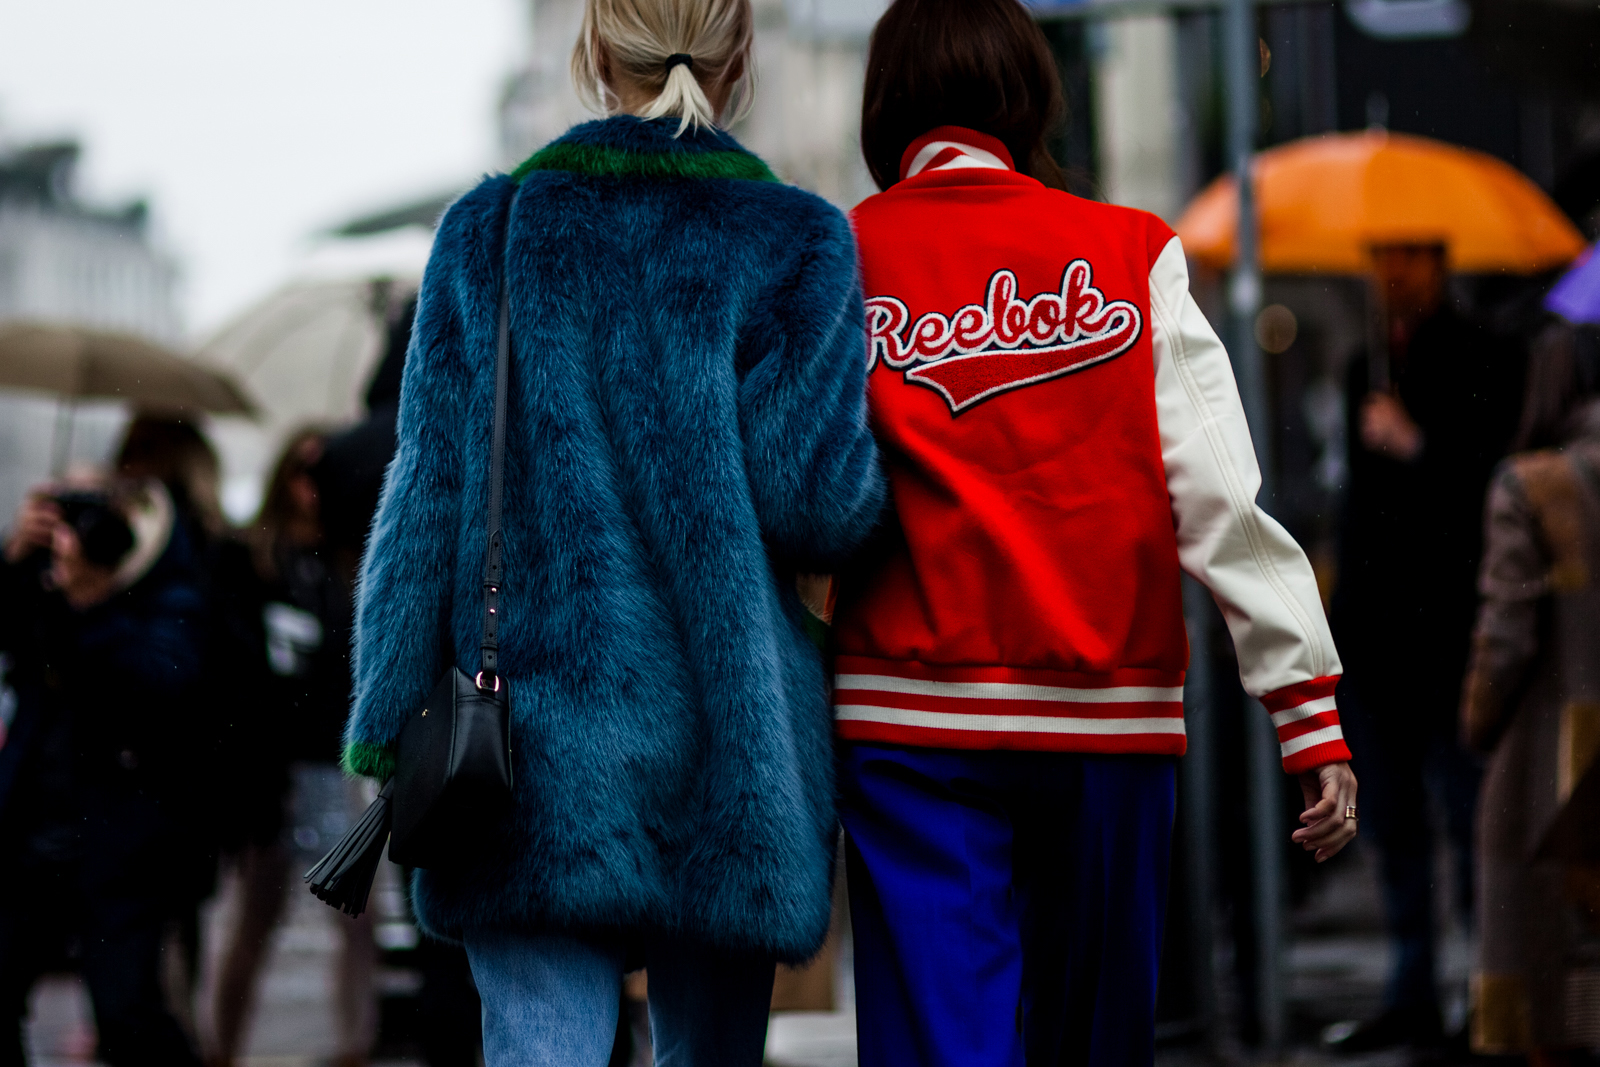 Linda Tol + Eleonora Carisi after a fashion show in Milan, Italy